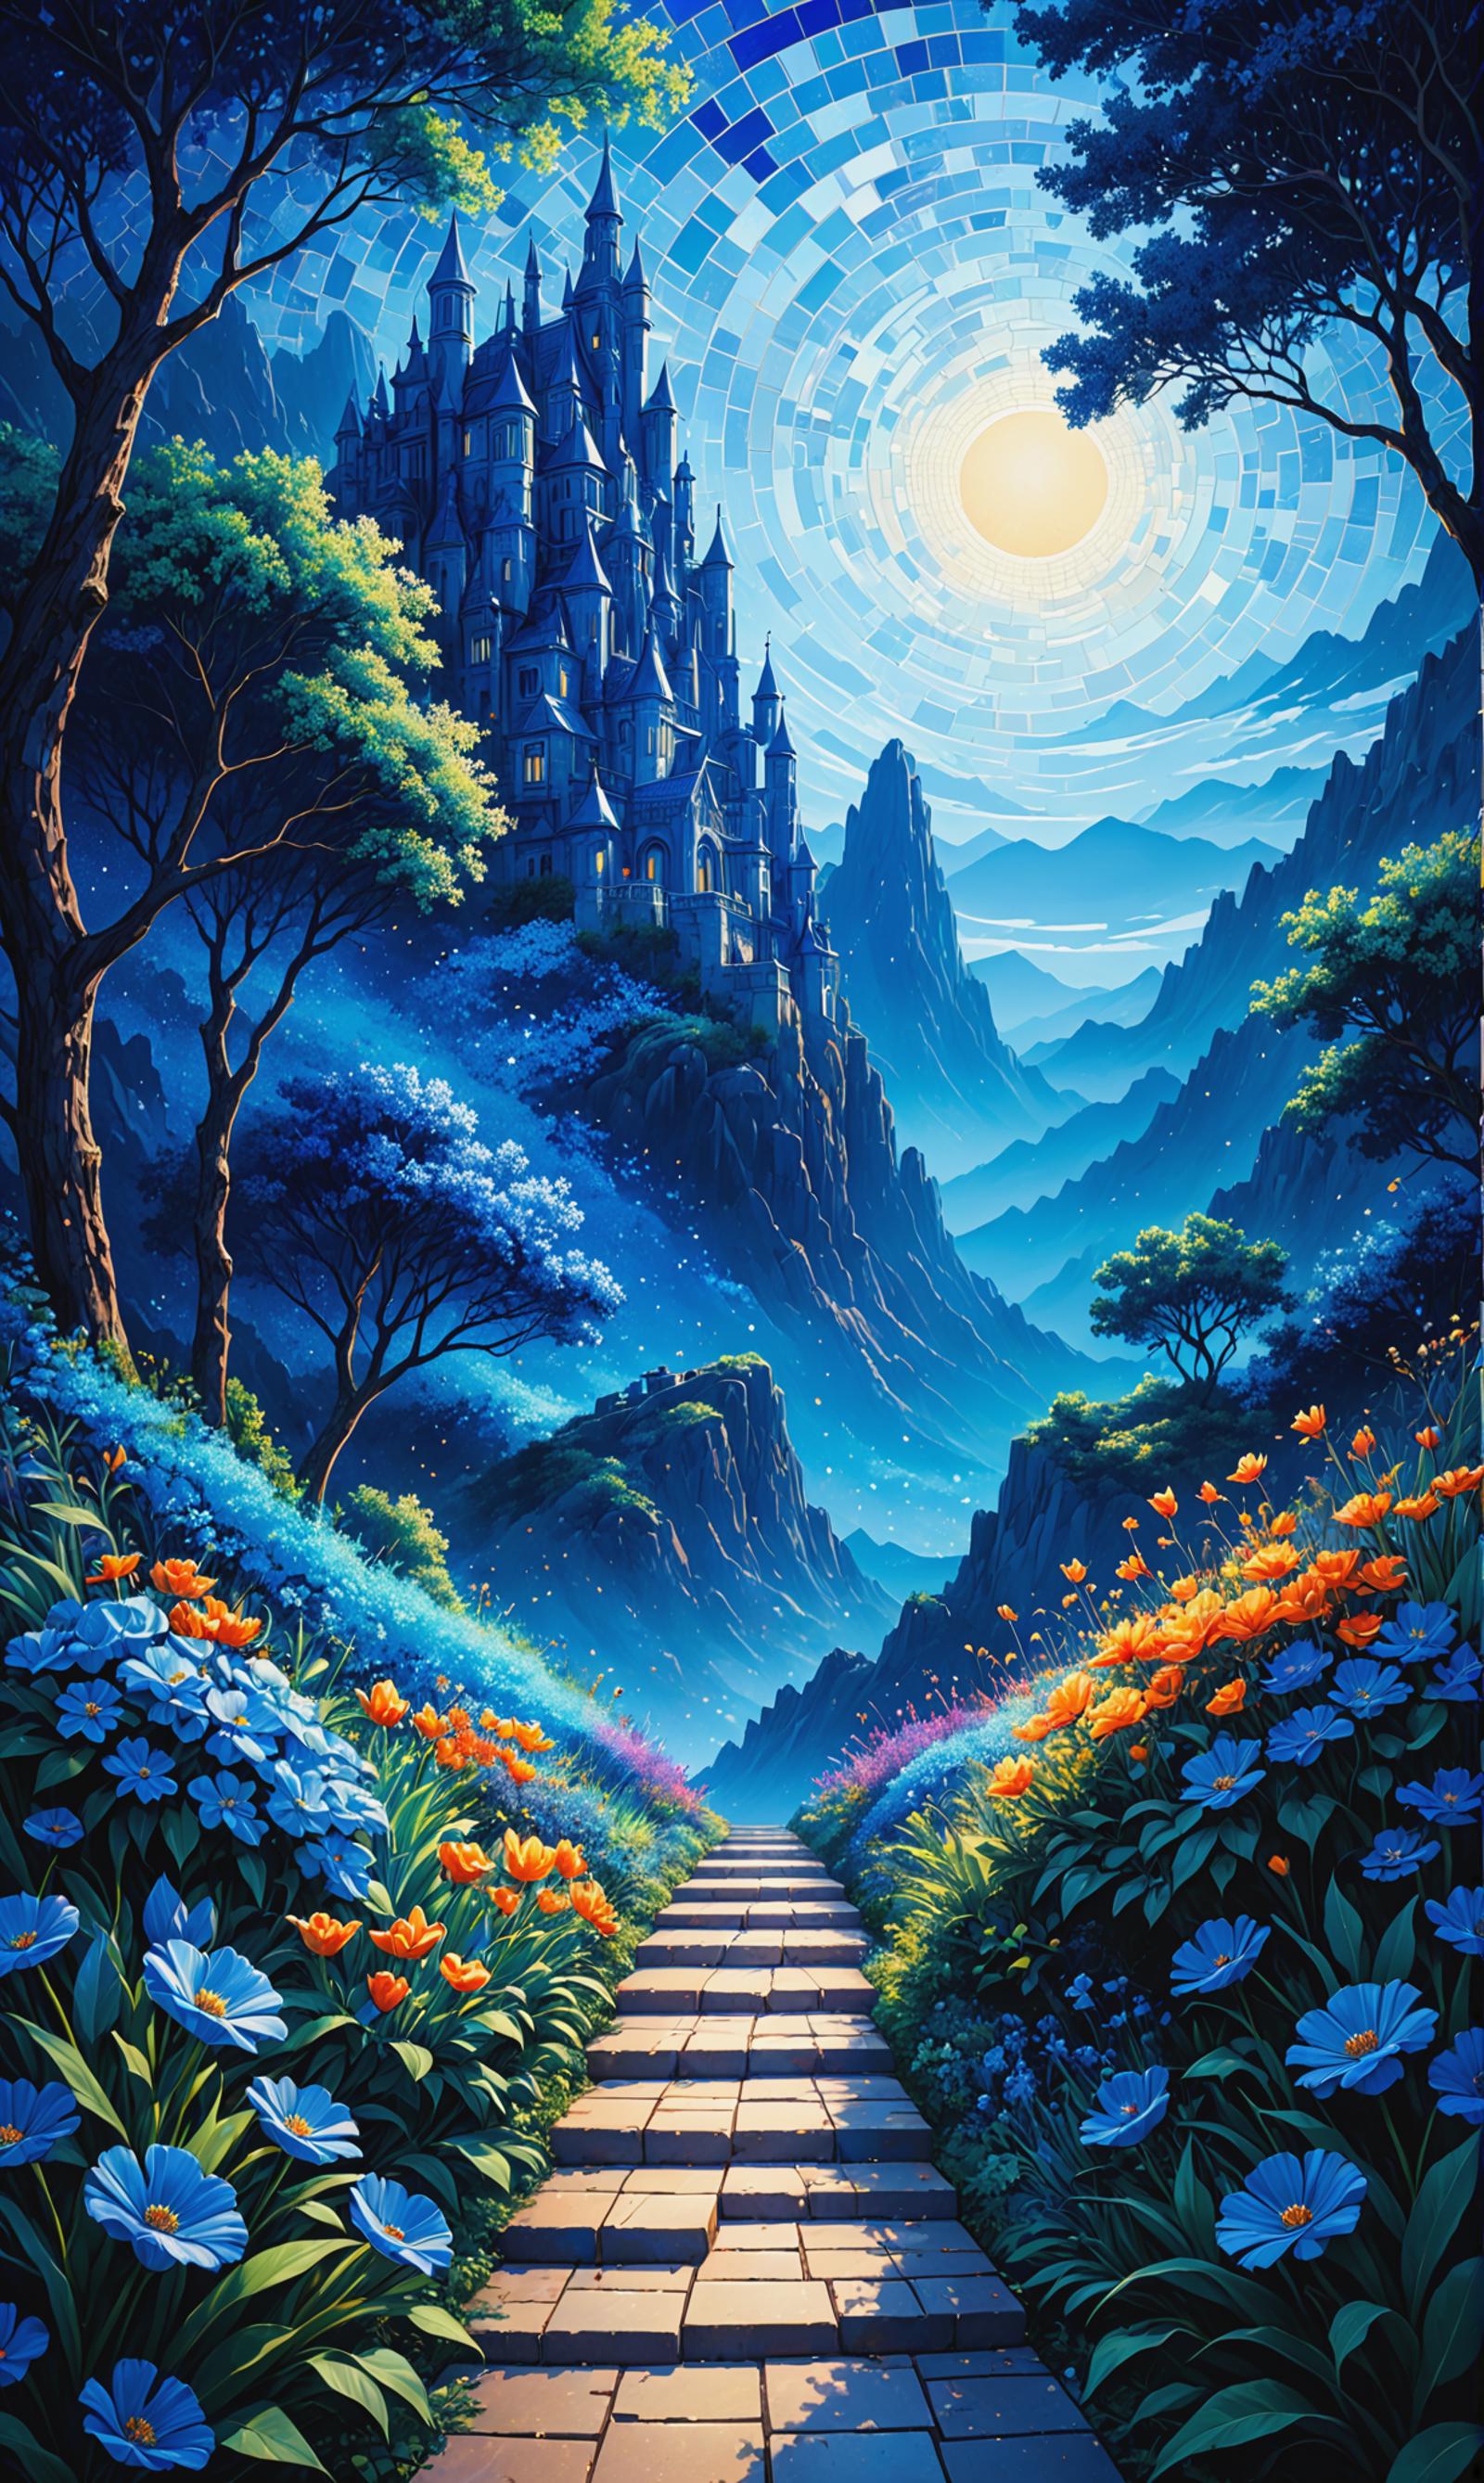 A beautiful painting of a mountain with a castle and a magical flower path